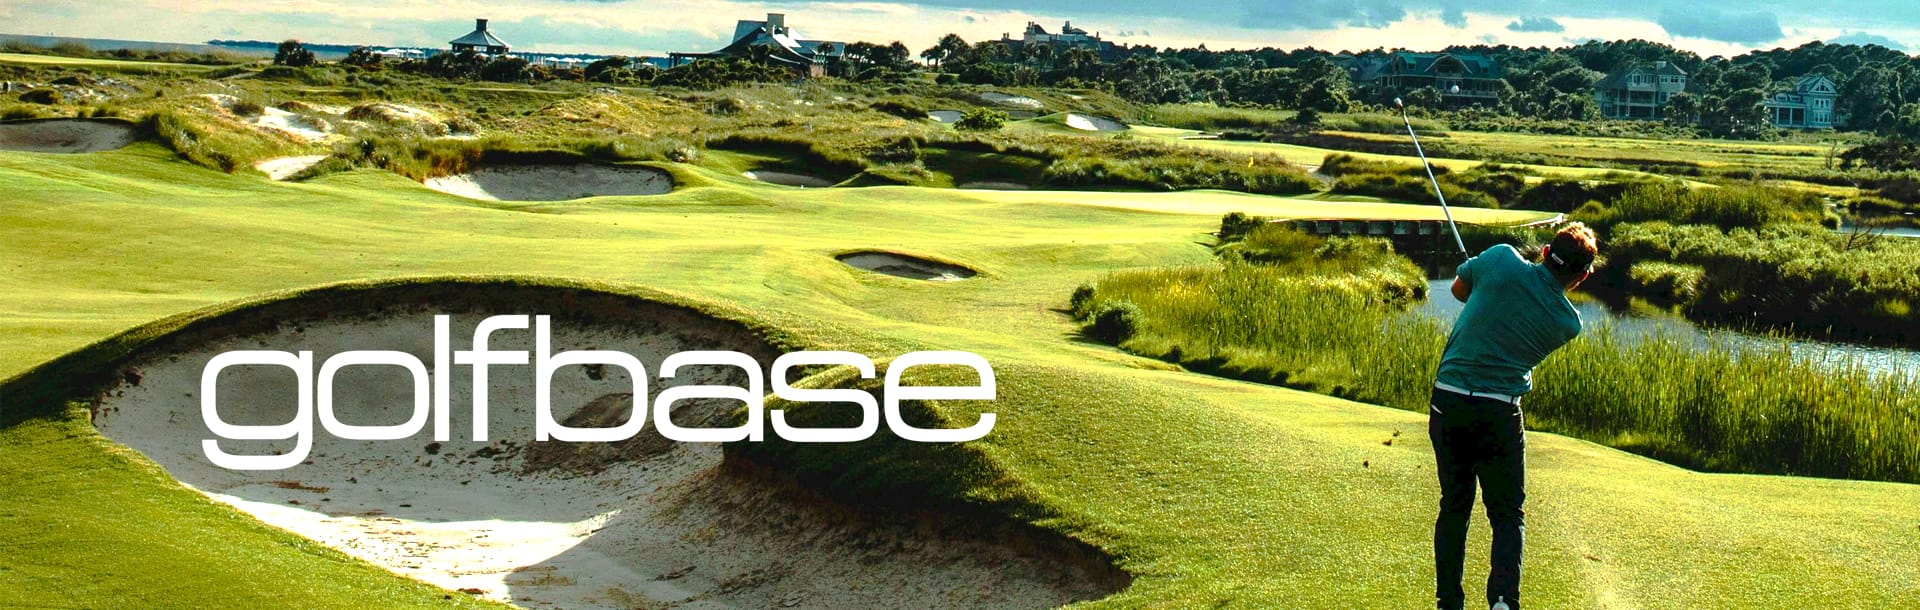 A golfer playing a shot on a course with the Golfbase logo superimposed